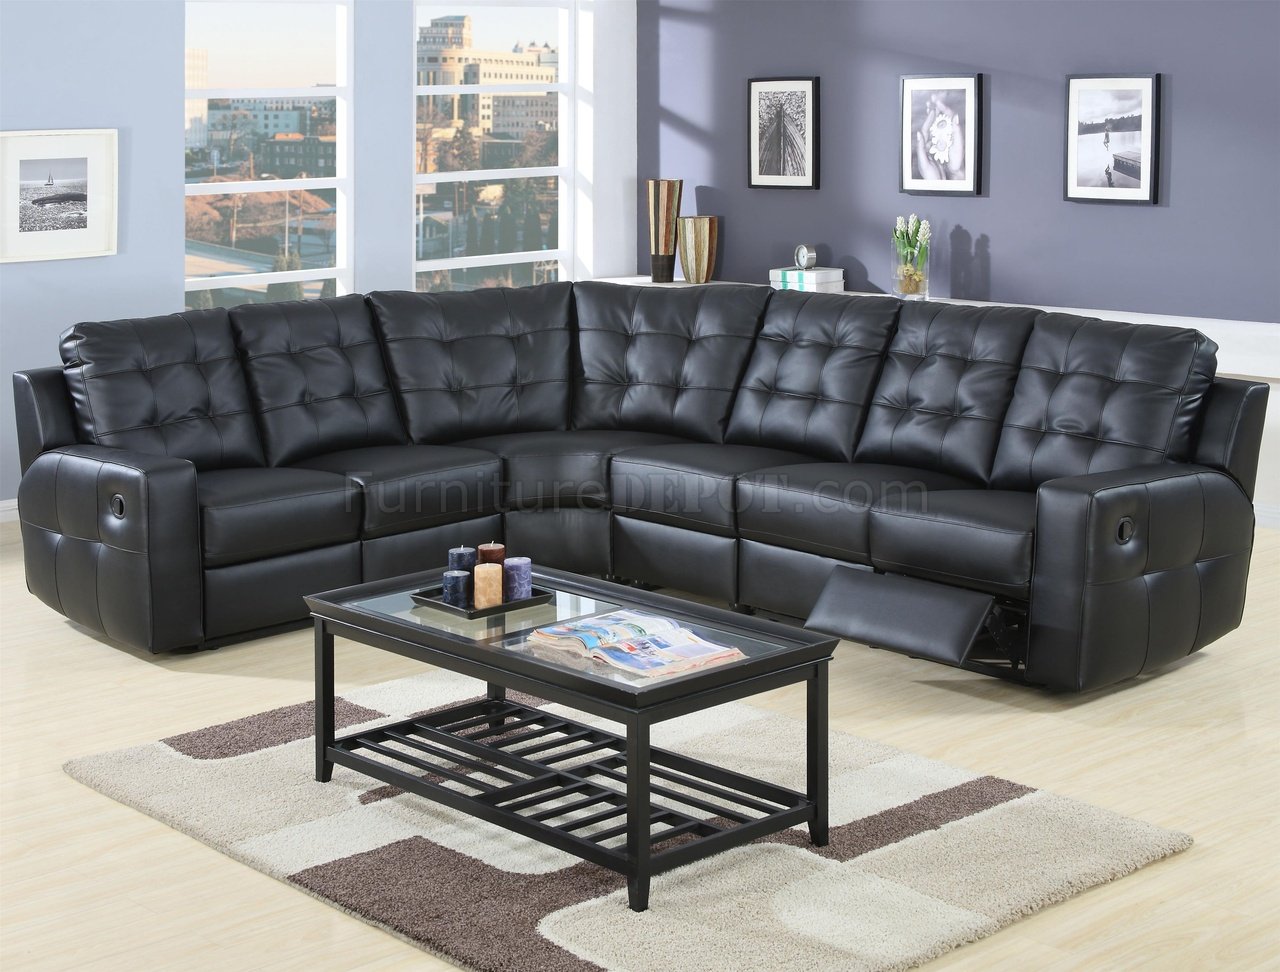 black leather 2 piece sectional sofa